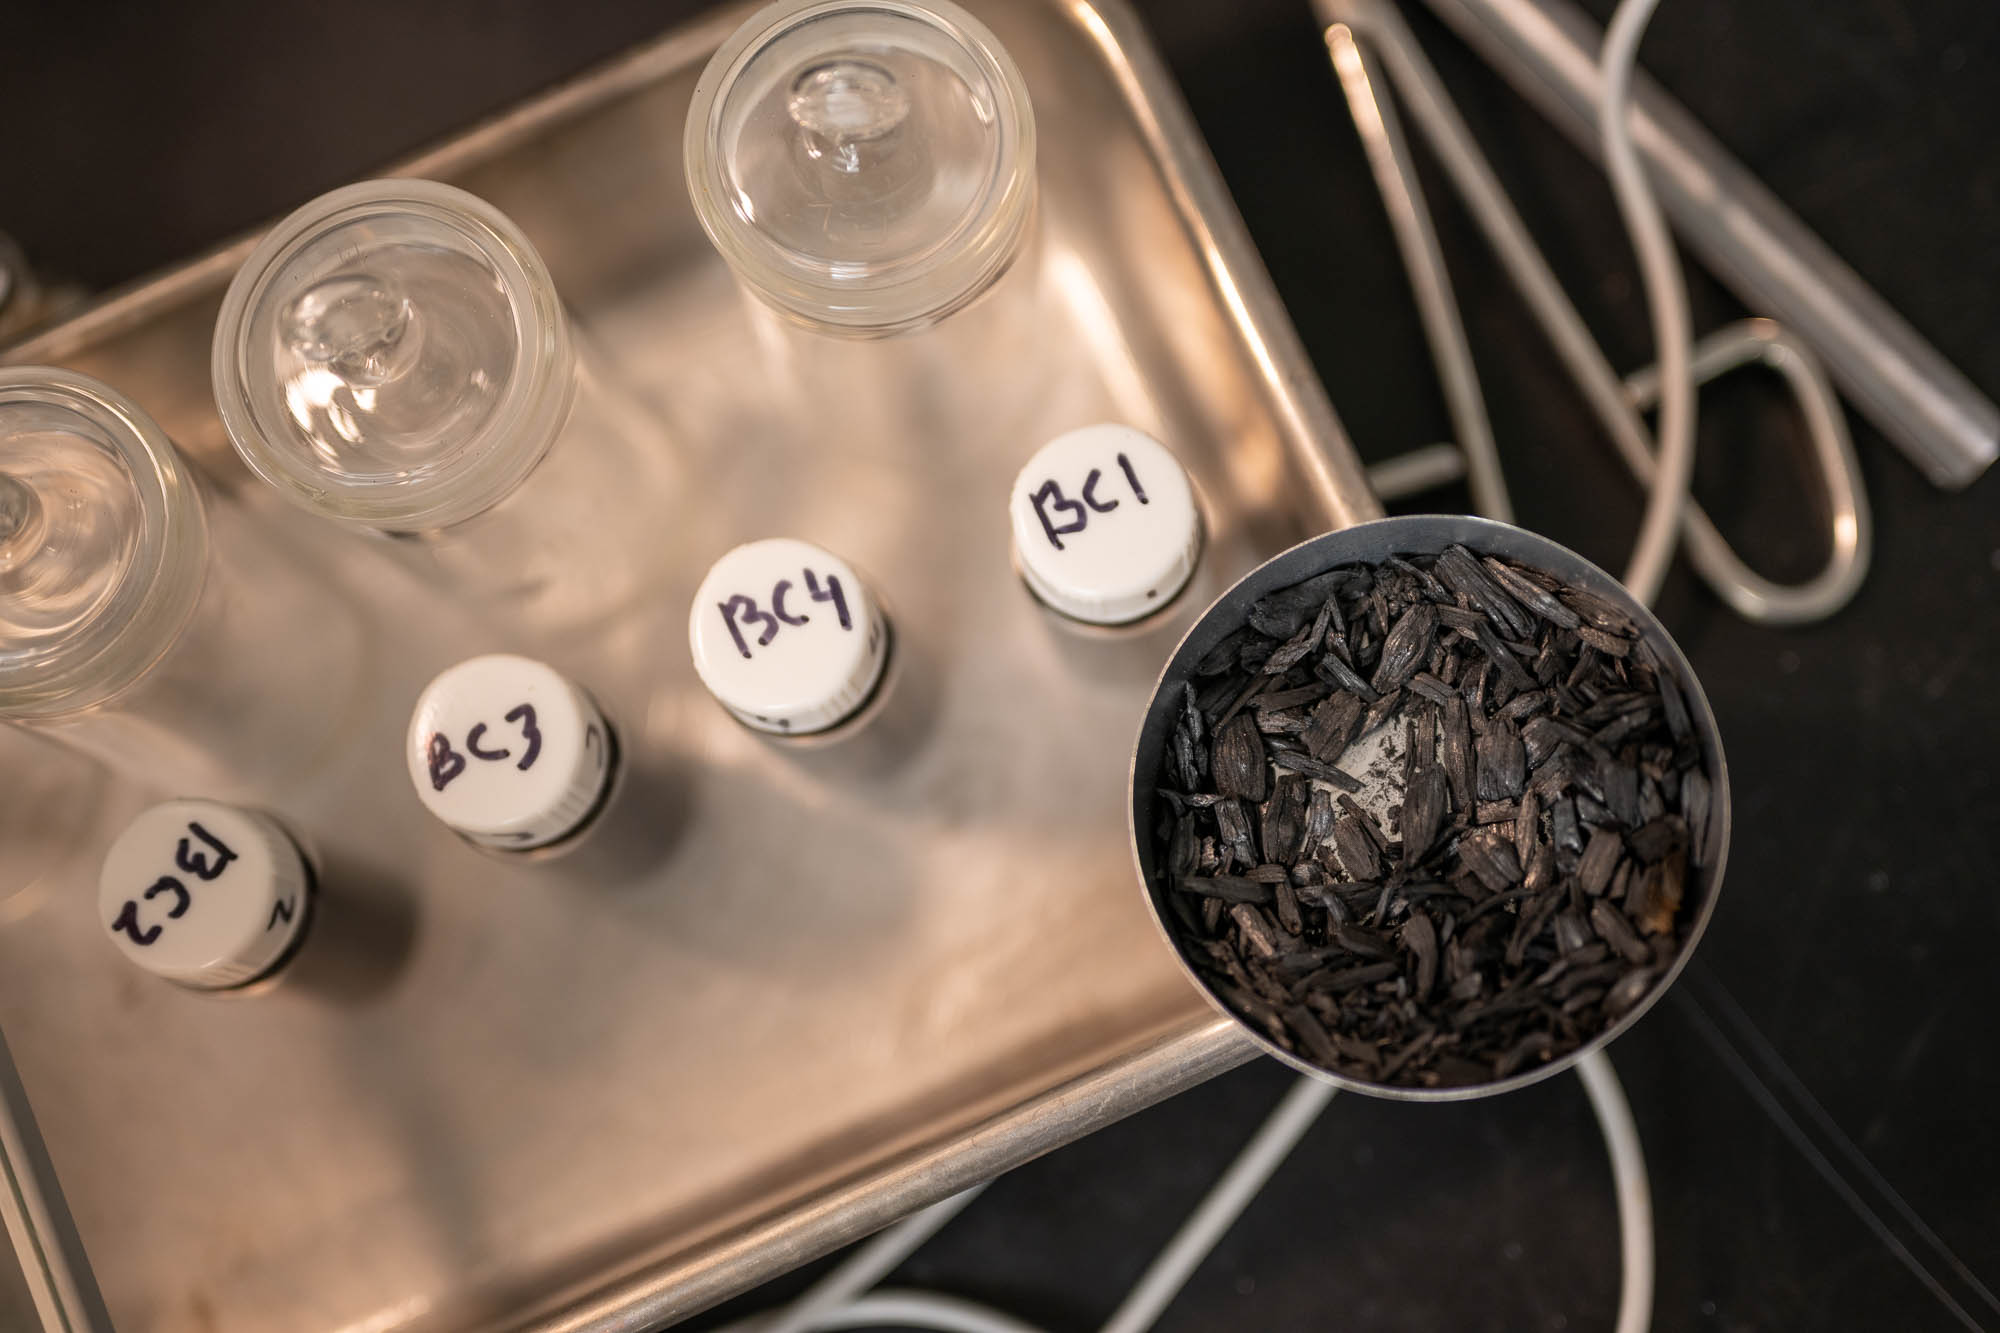 Biochar samples in test tubes hang out behind a larger sample in a petrie dish